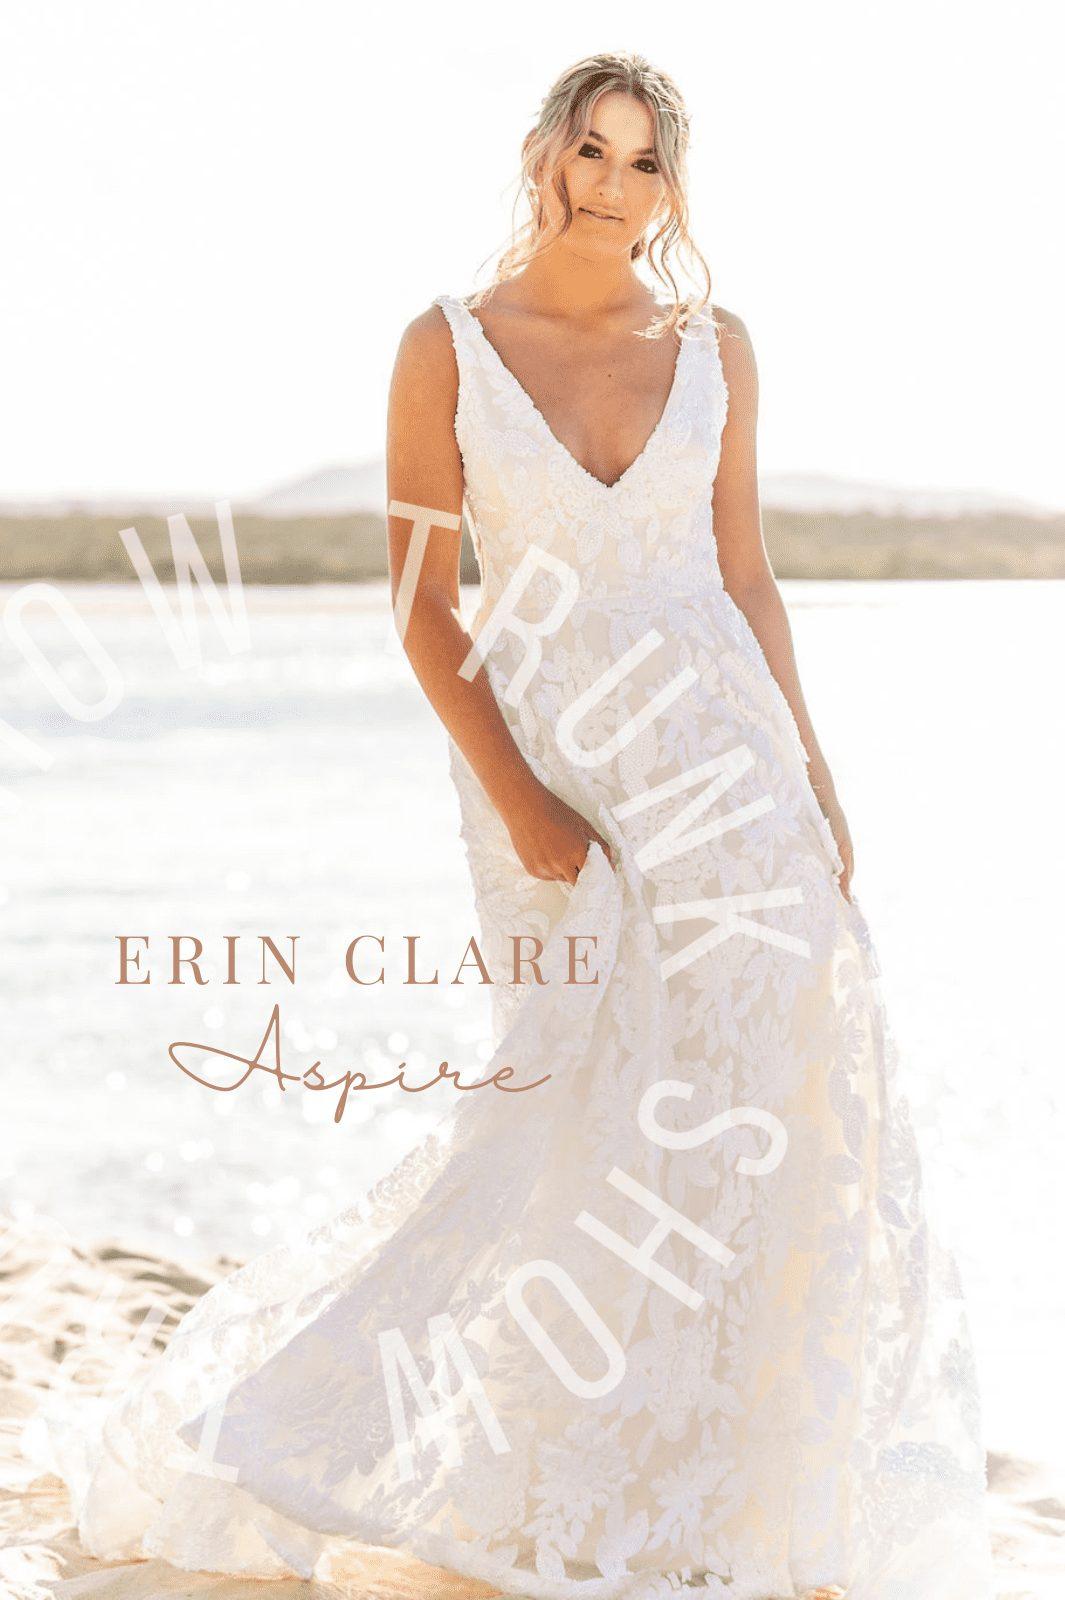 Erin Clare Aspire Trunk Show - White Lily Couture